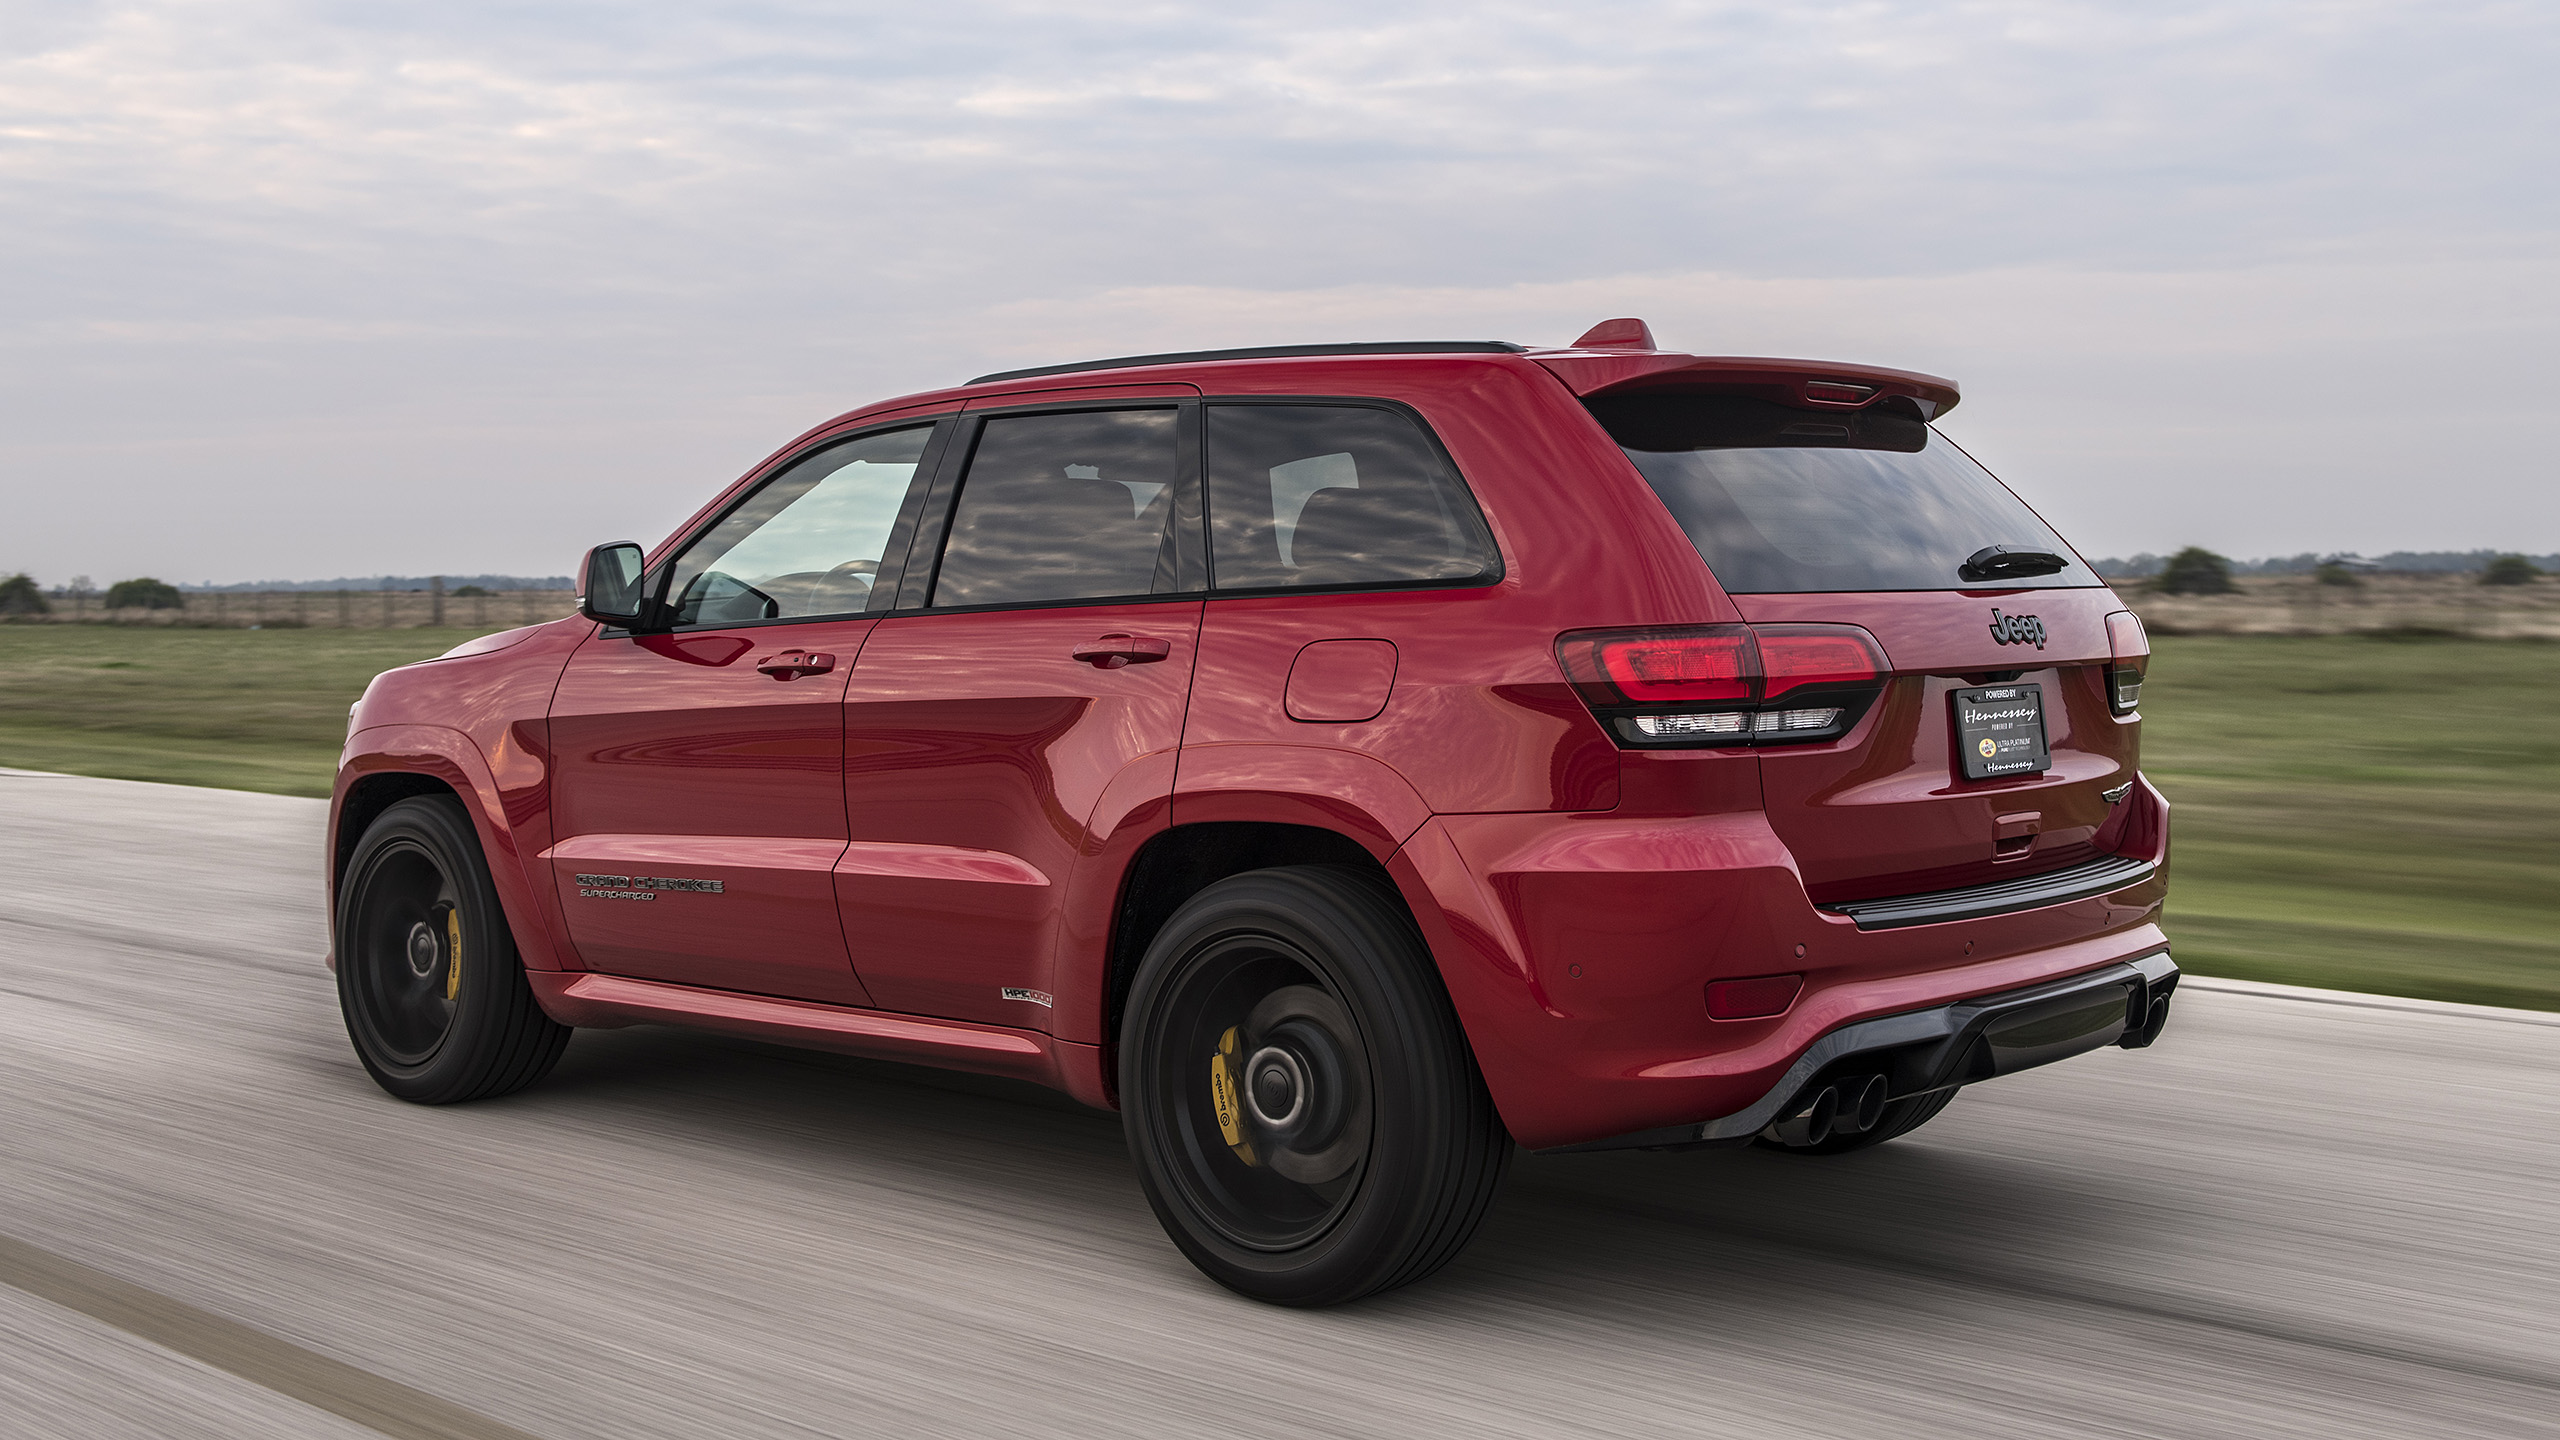 2019 Hennessey Jeep Grand Cherokee Trackhawk HPE1000 driving review | Autoblog